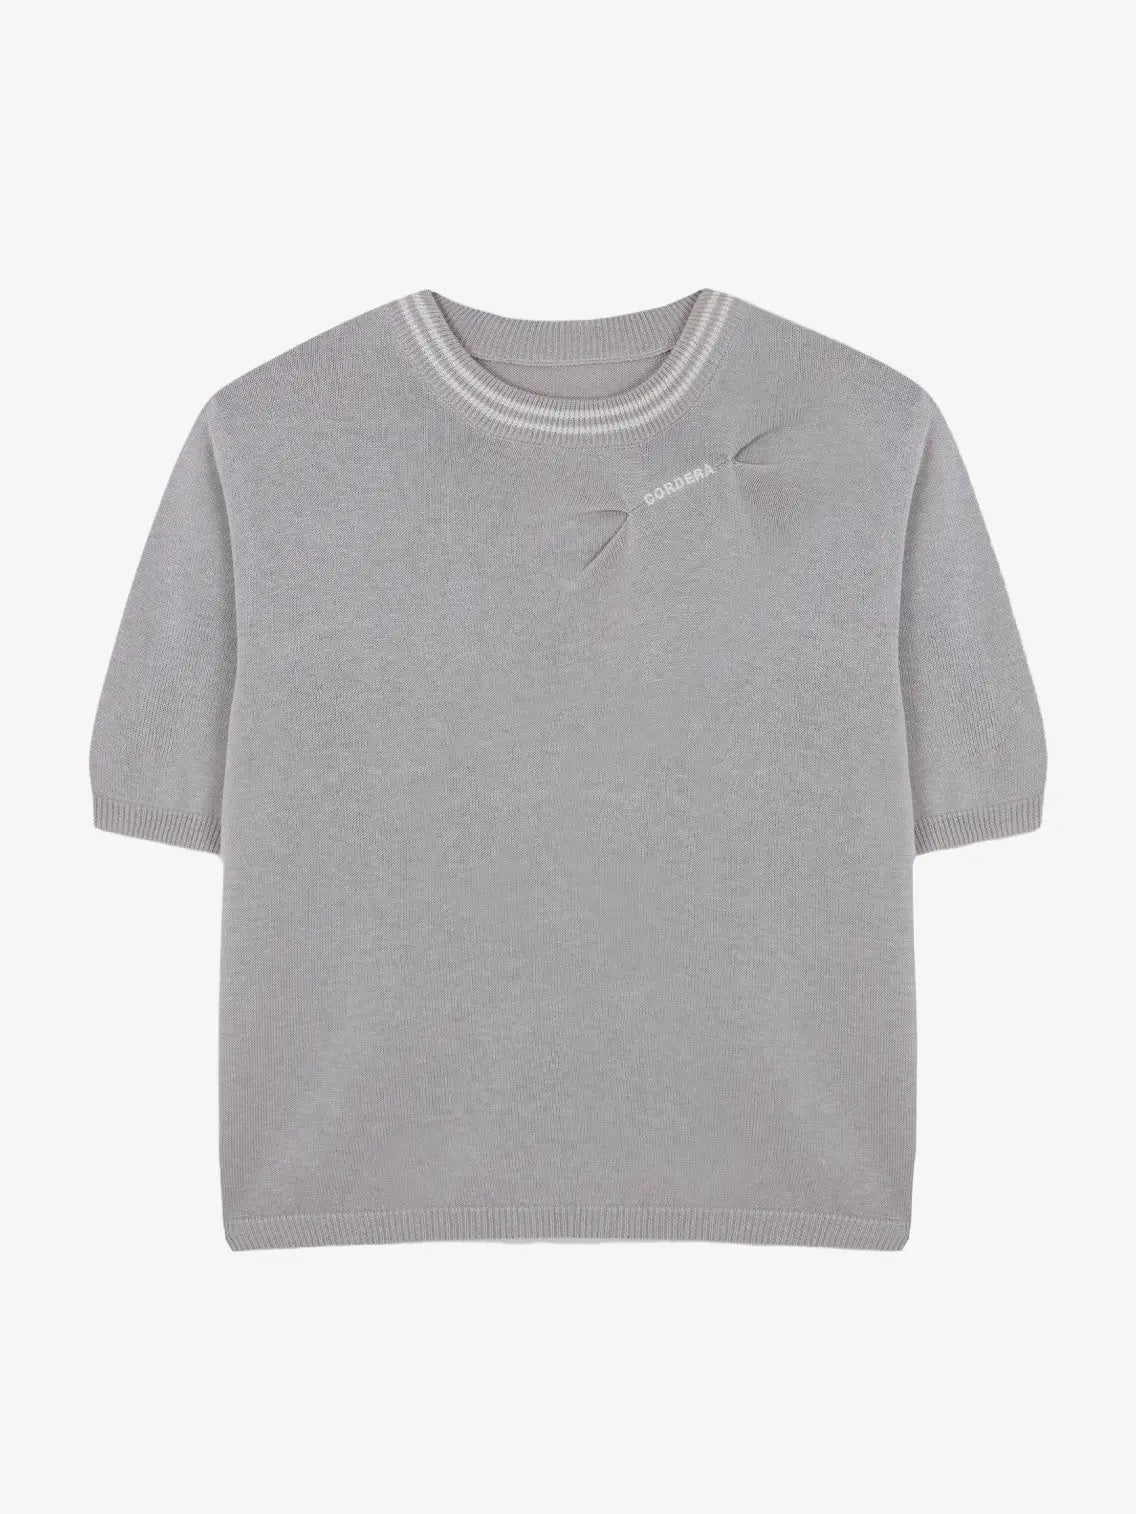 A light gray short-sleeve sweater with a round neckline. The Cordera Silk Logo Top Murmur features a small, subtle cut-out detail near the shoulder area and text that reads "CONDANSA" in white near the cut-out. Available at Bassalstore Barcelona, this piece also boasts ribbed hem and cuff detailing.